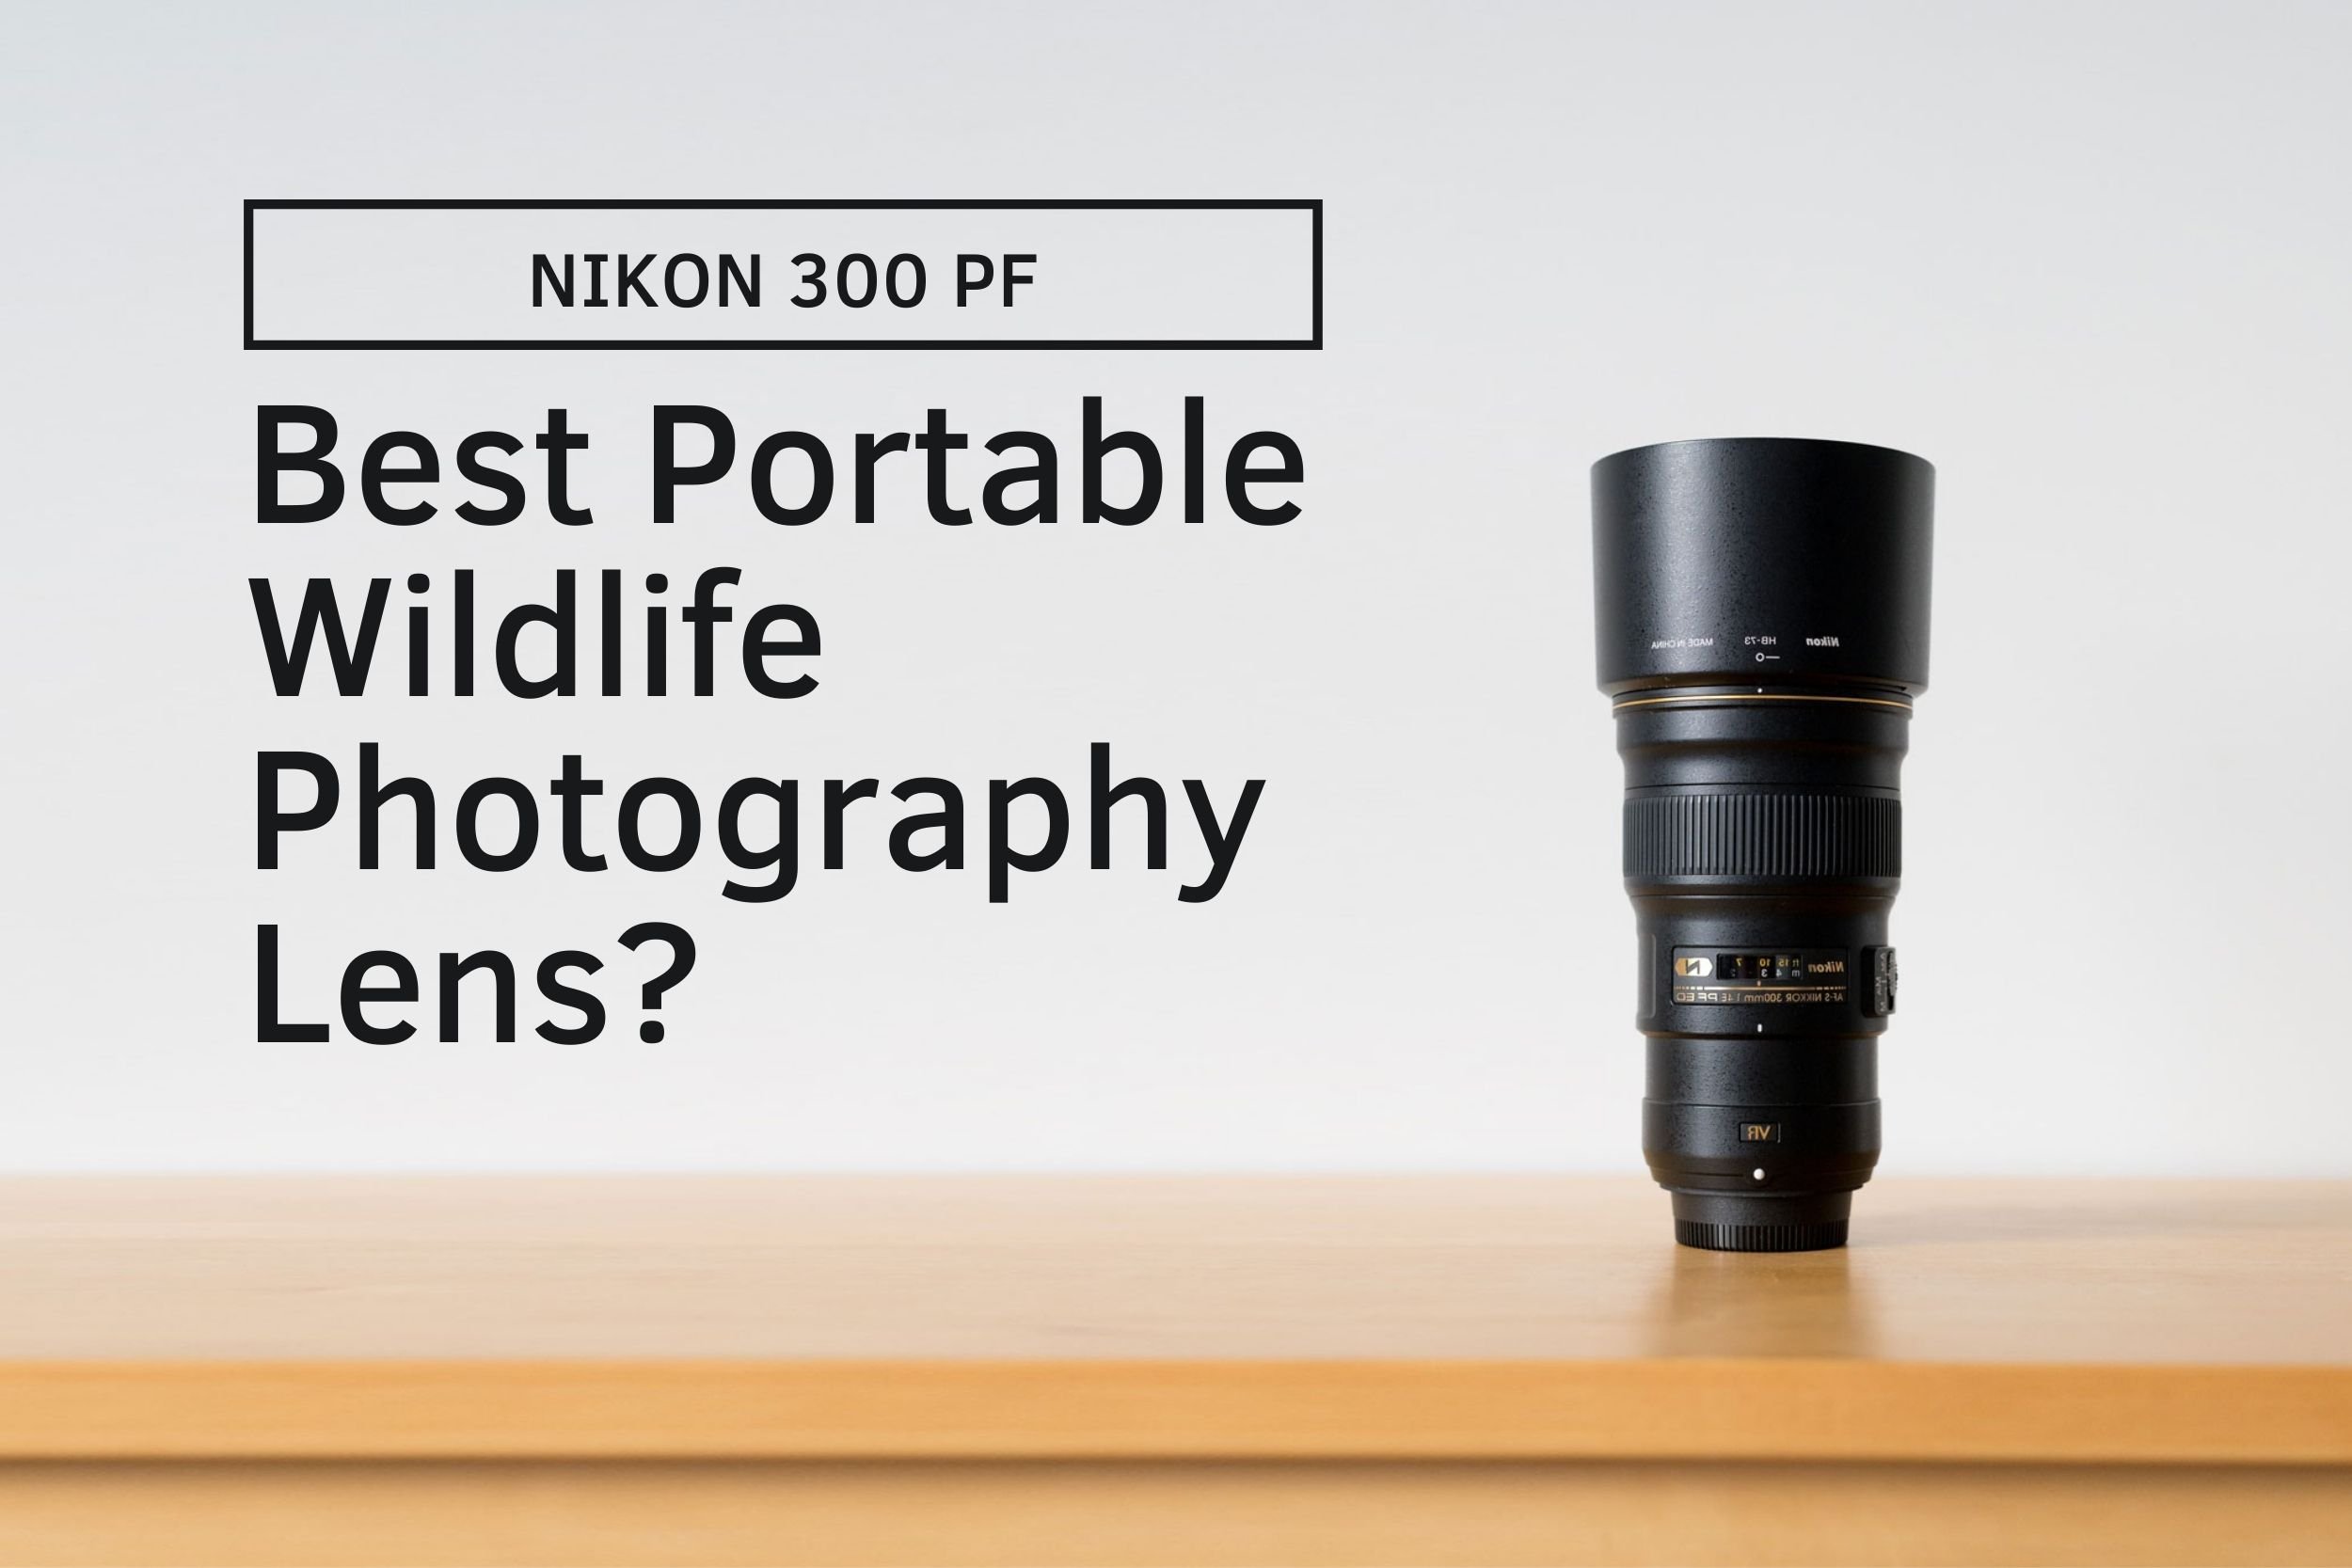 Is the Nikon 300 PF the most portable lens for wildlife